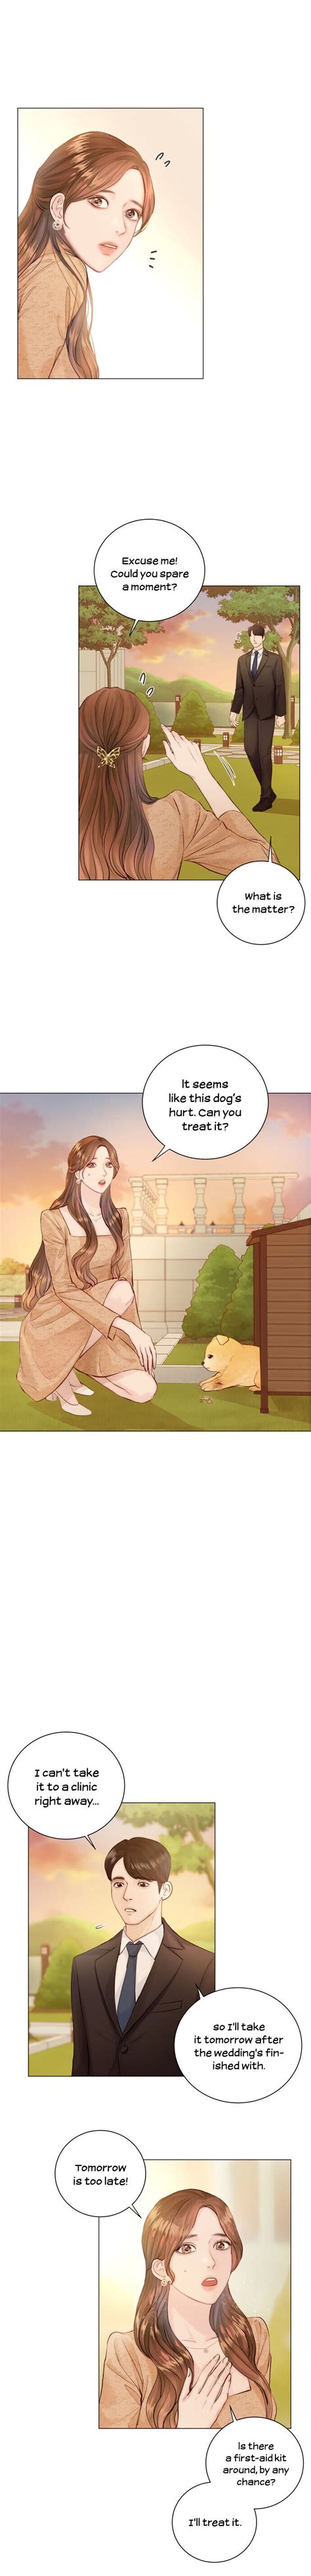 N/a, it has 590 views. Surely a Happy Ending - Chapter 1 - 1ST KISS MANHUA